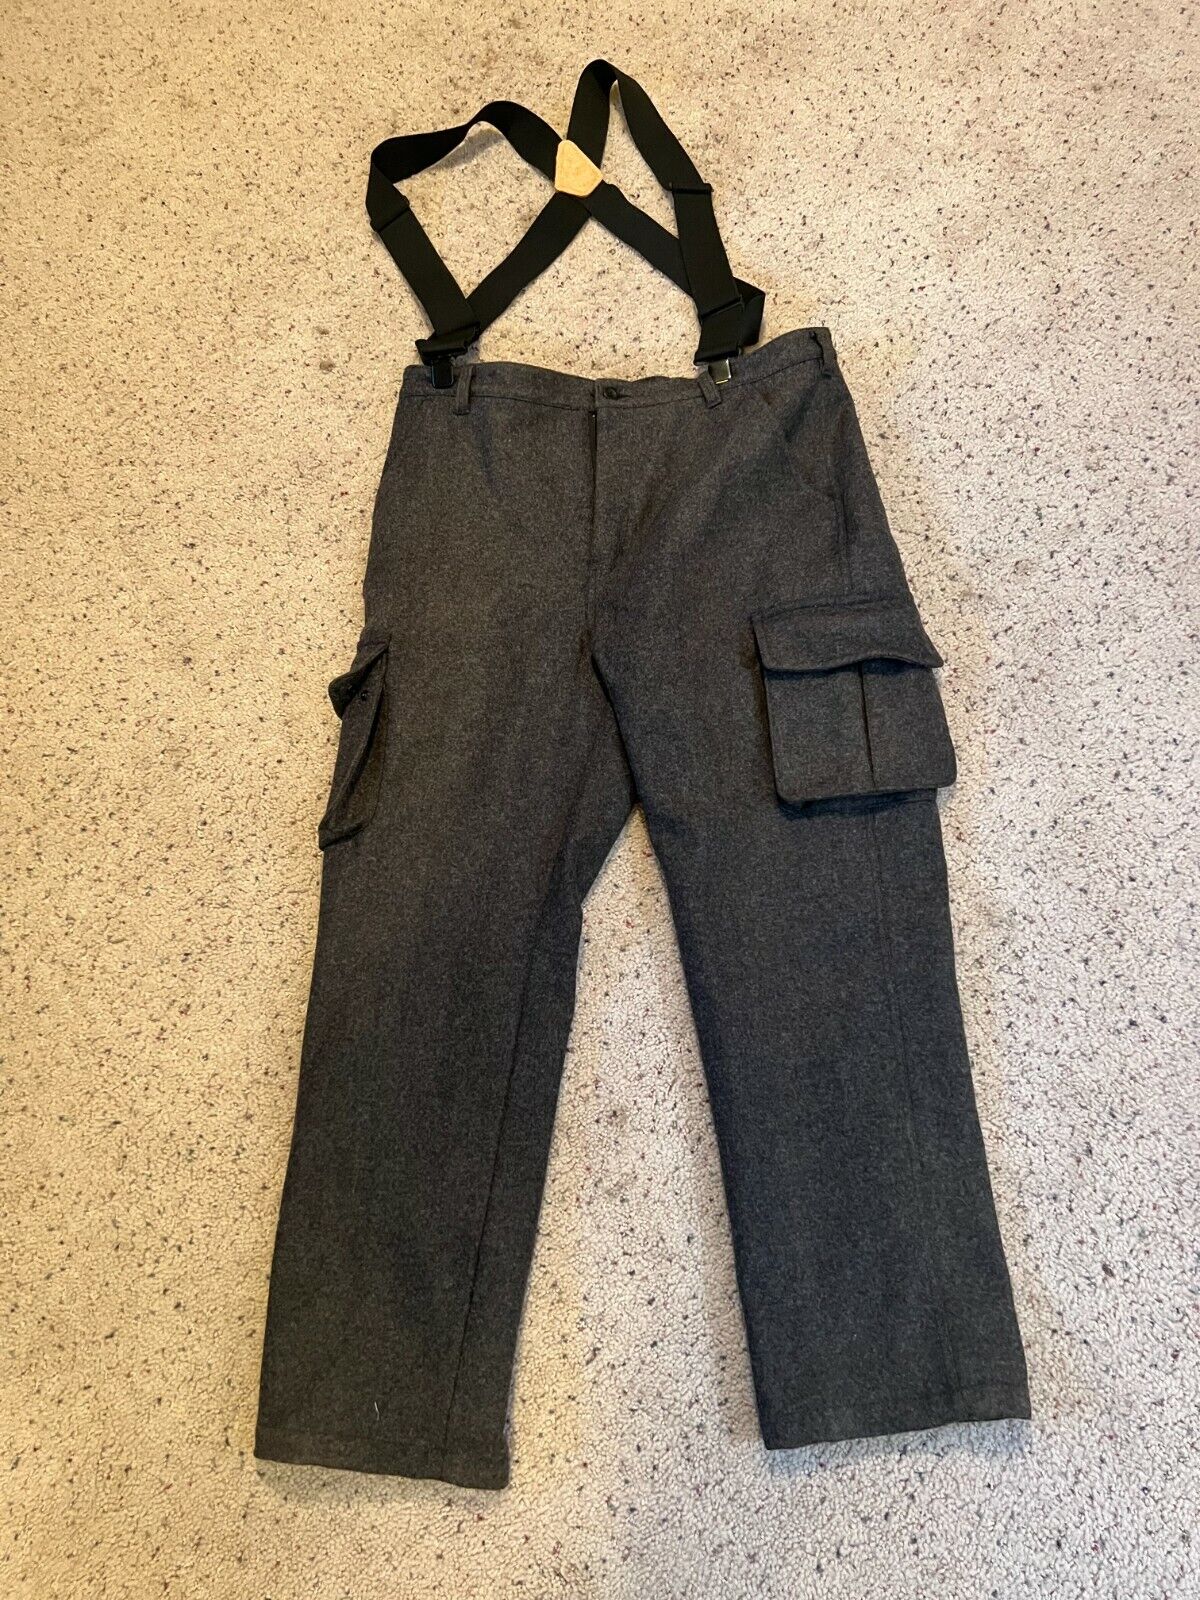 Cabela's Dry Plus 100% Wool Charcoal Grey Insulated Pants Men's Size 40